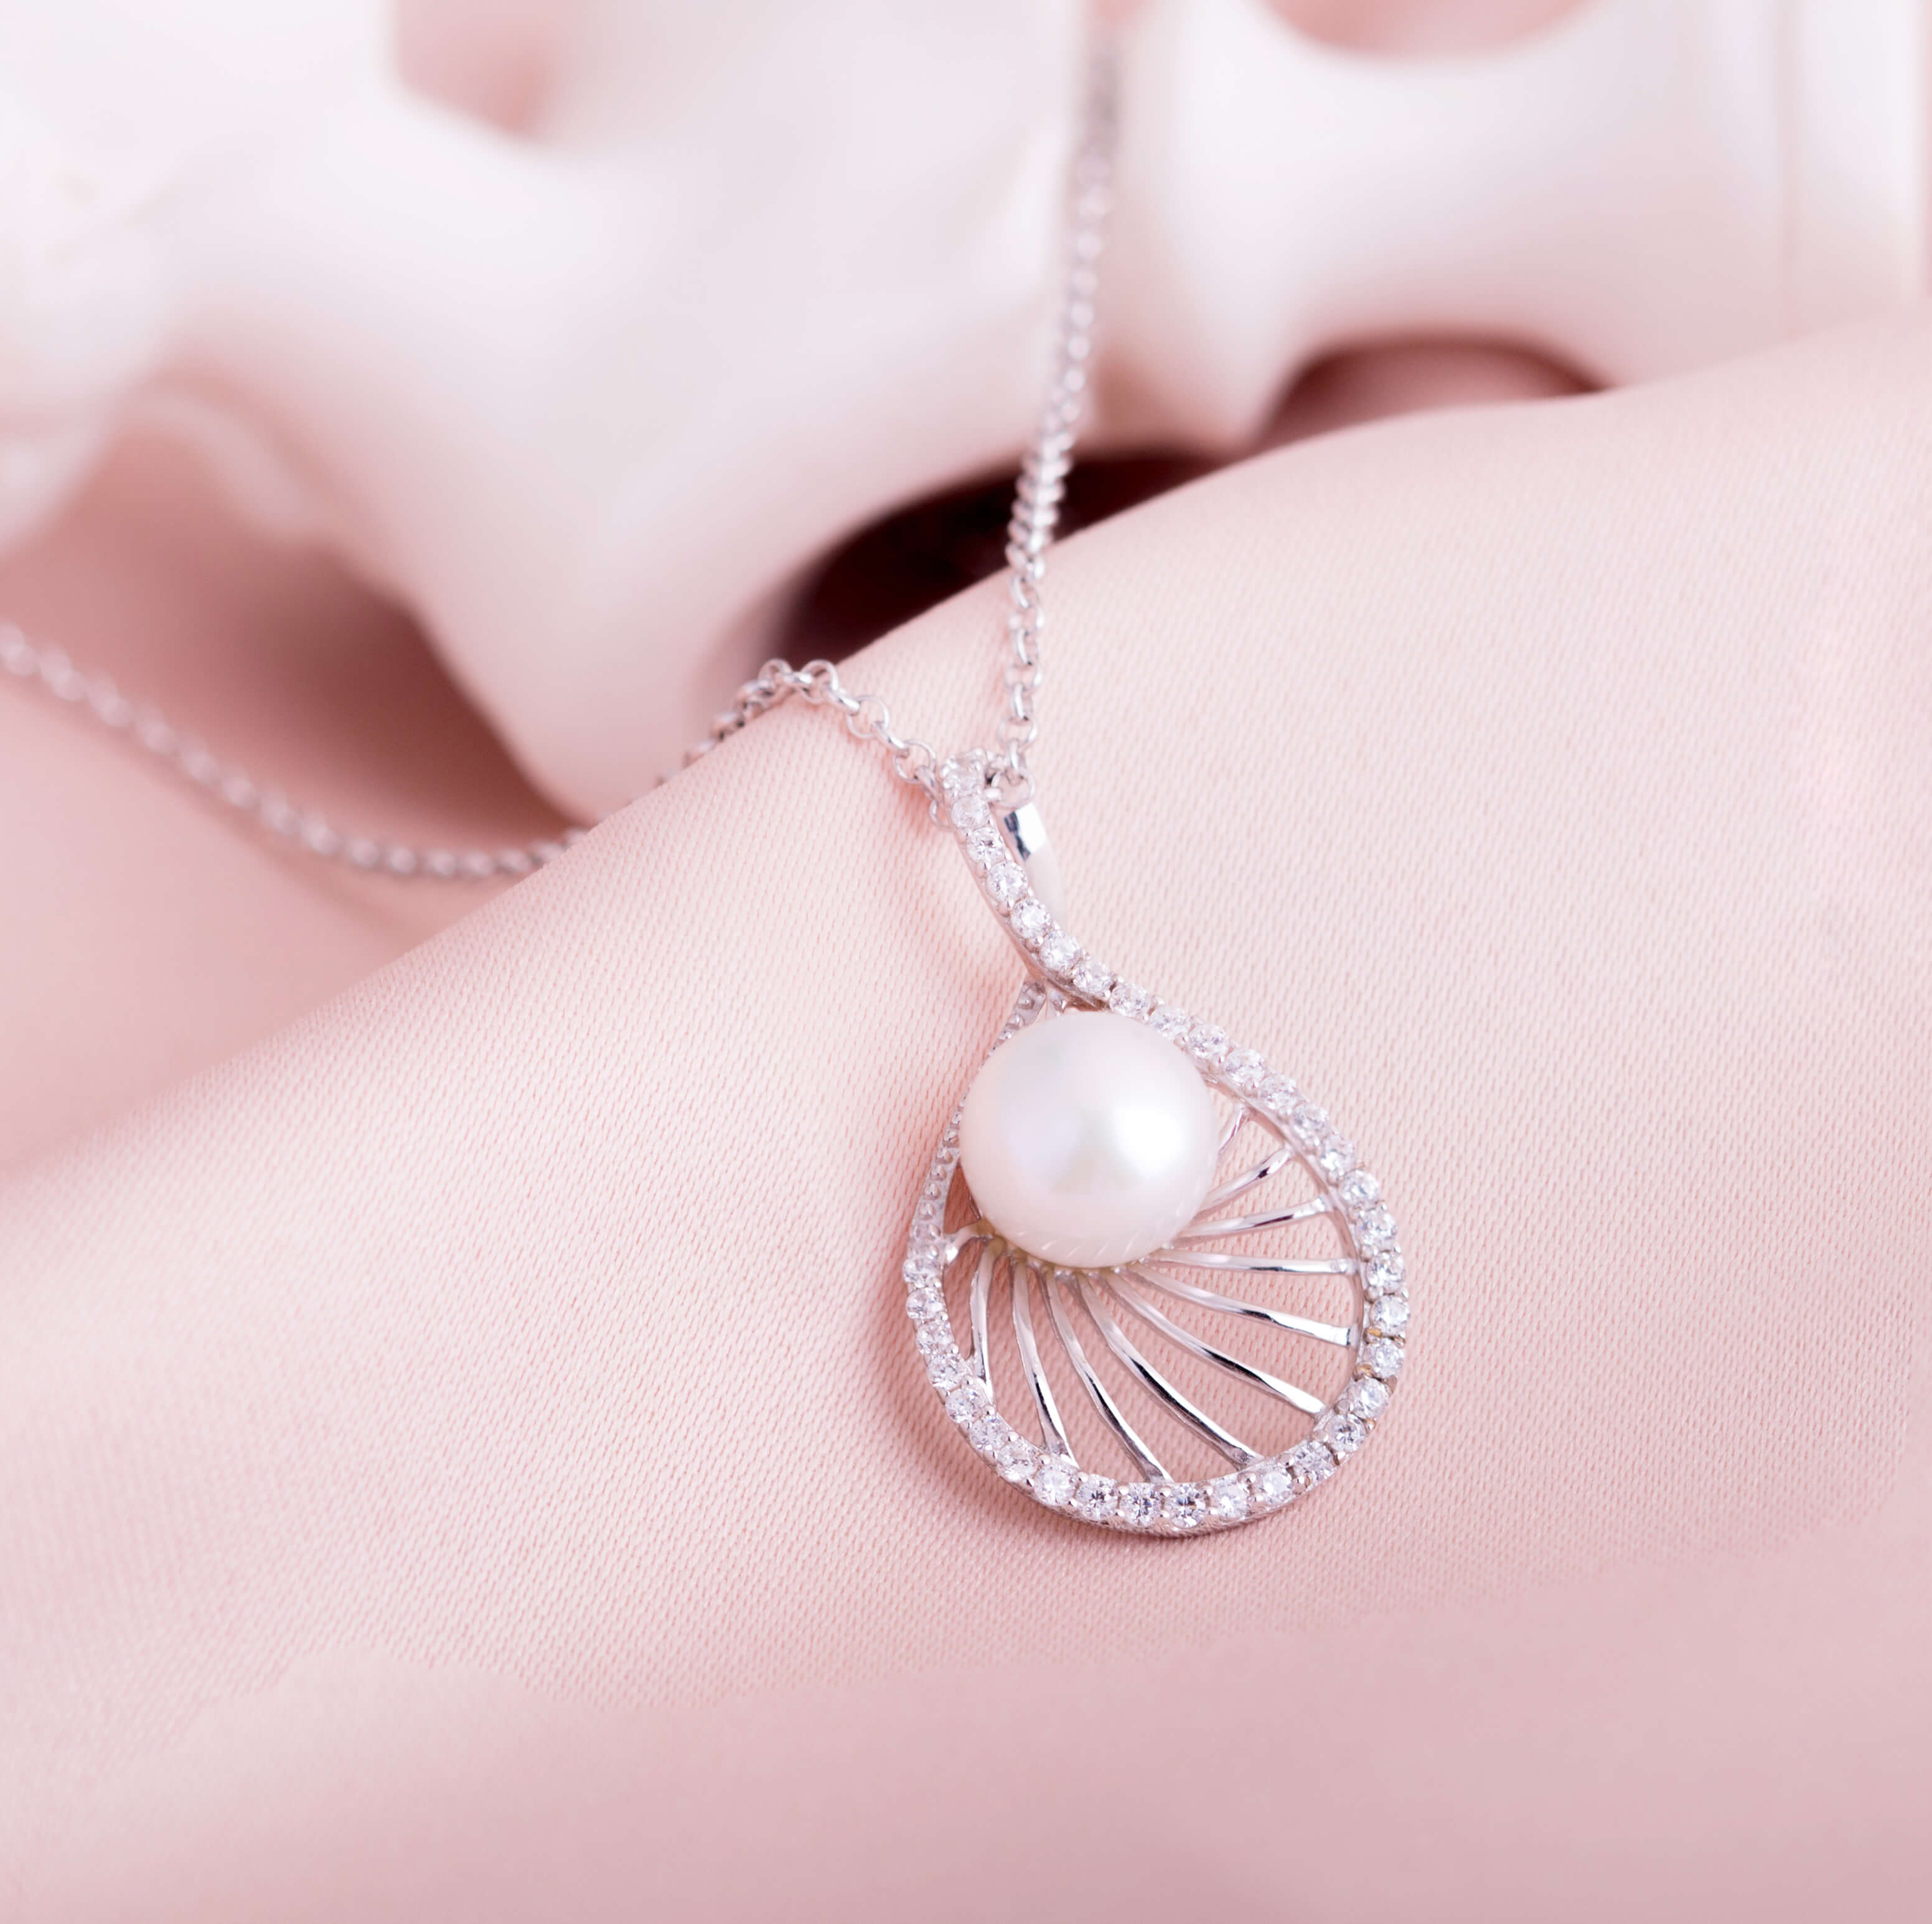 Molah 925 Silver Cultured Freshwater Pearl and Cubic Zirconia Swirl Teardrop Pendant Necklace